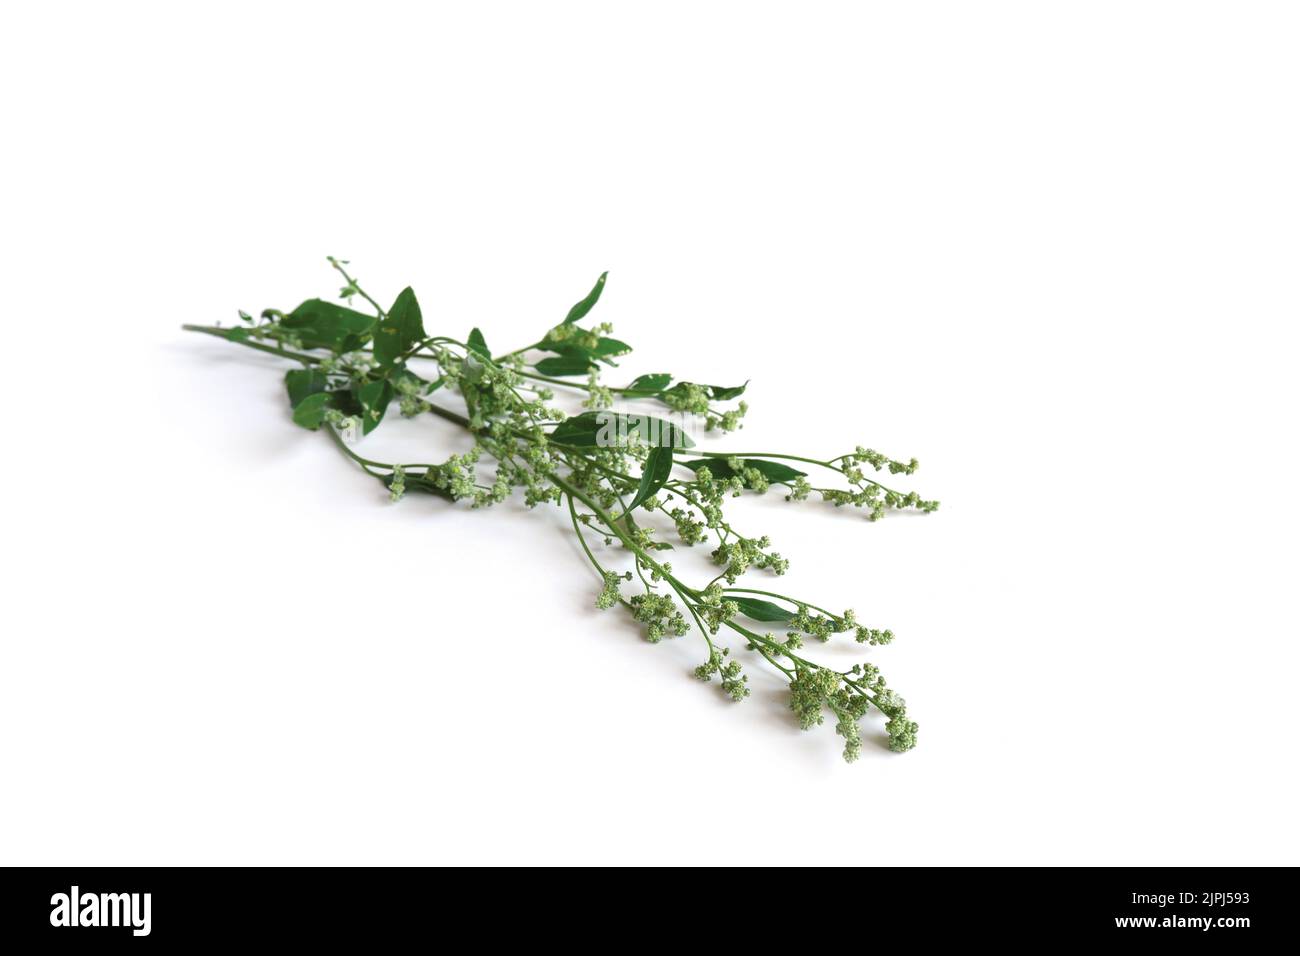 Garden Orach Atriplex hortensis with leaves, flowers, seeds. Quinoa twigs with young seed heads on a white background.  Stock Photo